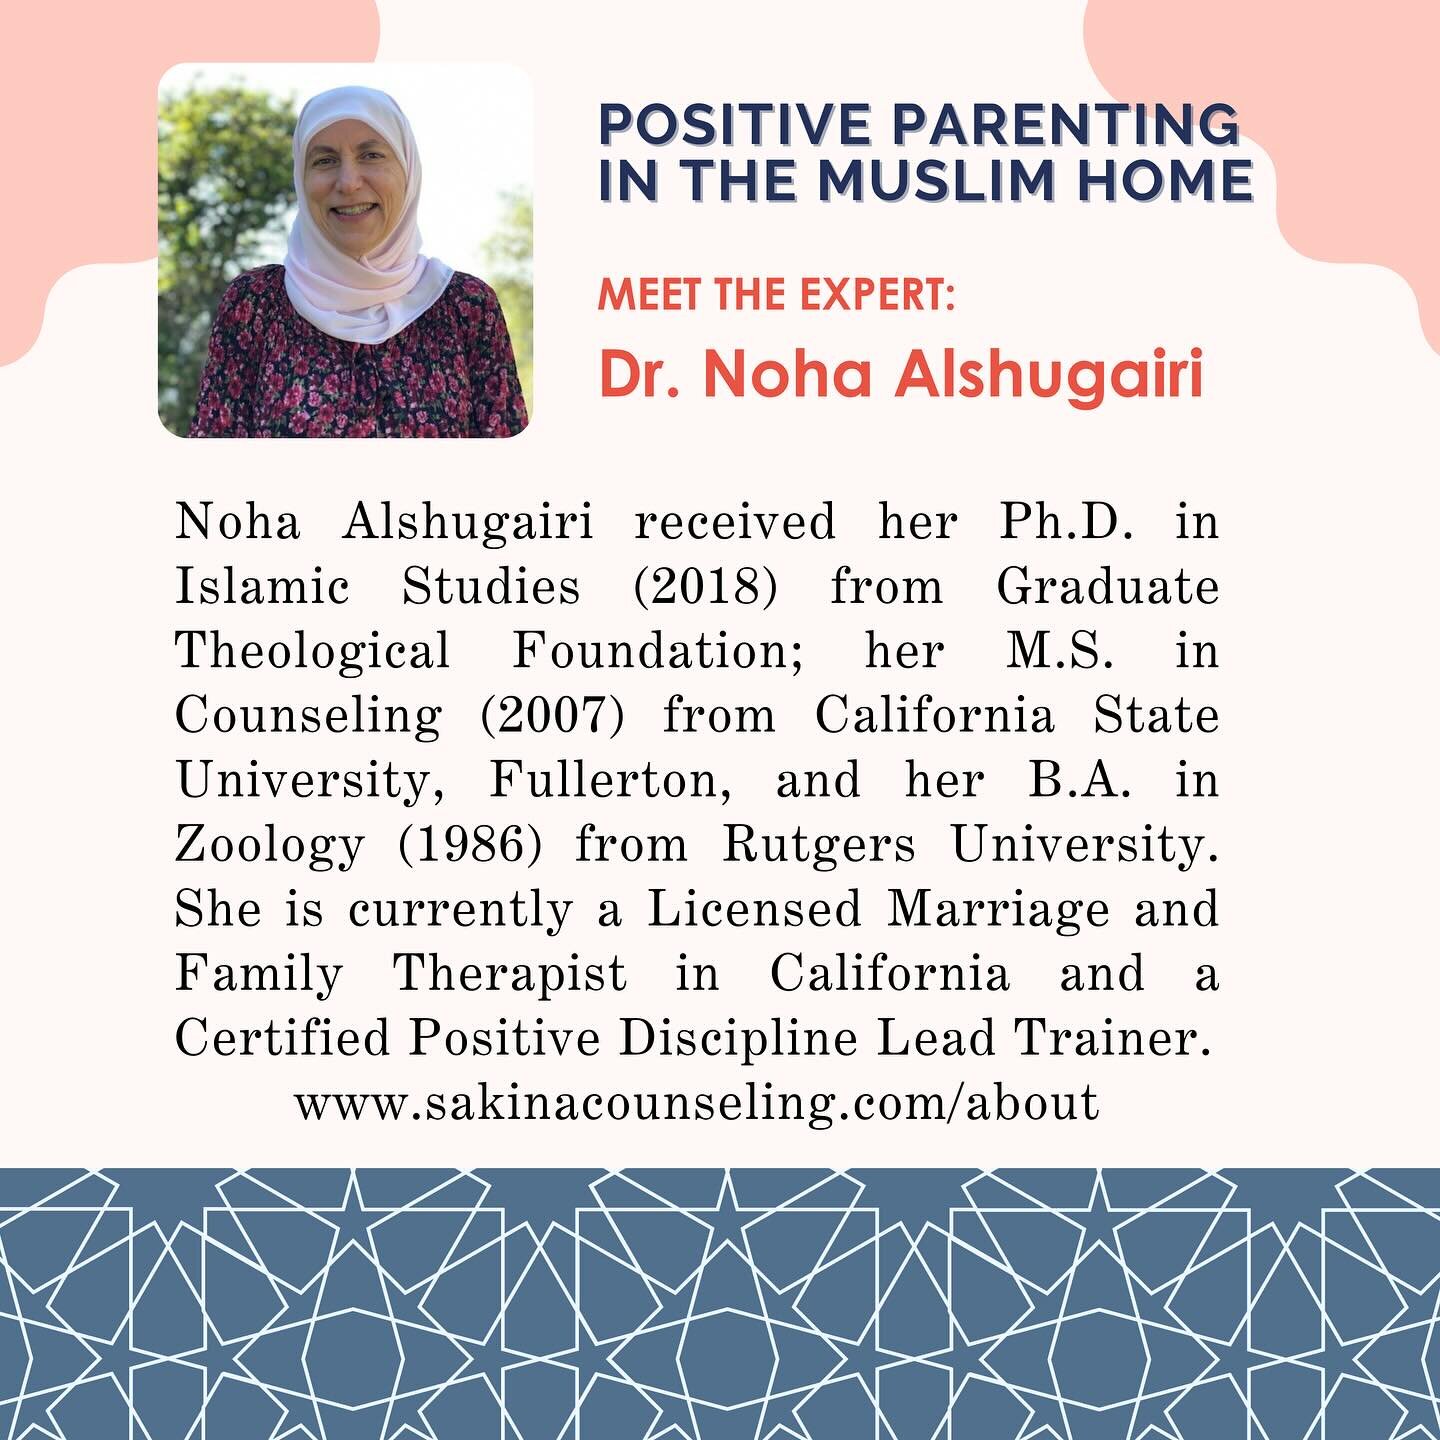 3 days away! Join us this Saturday for an in-person workshop with Dr. Noha (@nohaalshugairi) to explore Positive Parenting in the Muslim Home. This interactive workshop features hands-on tools you can utilize right away. Childcare available for ages 